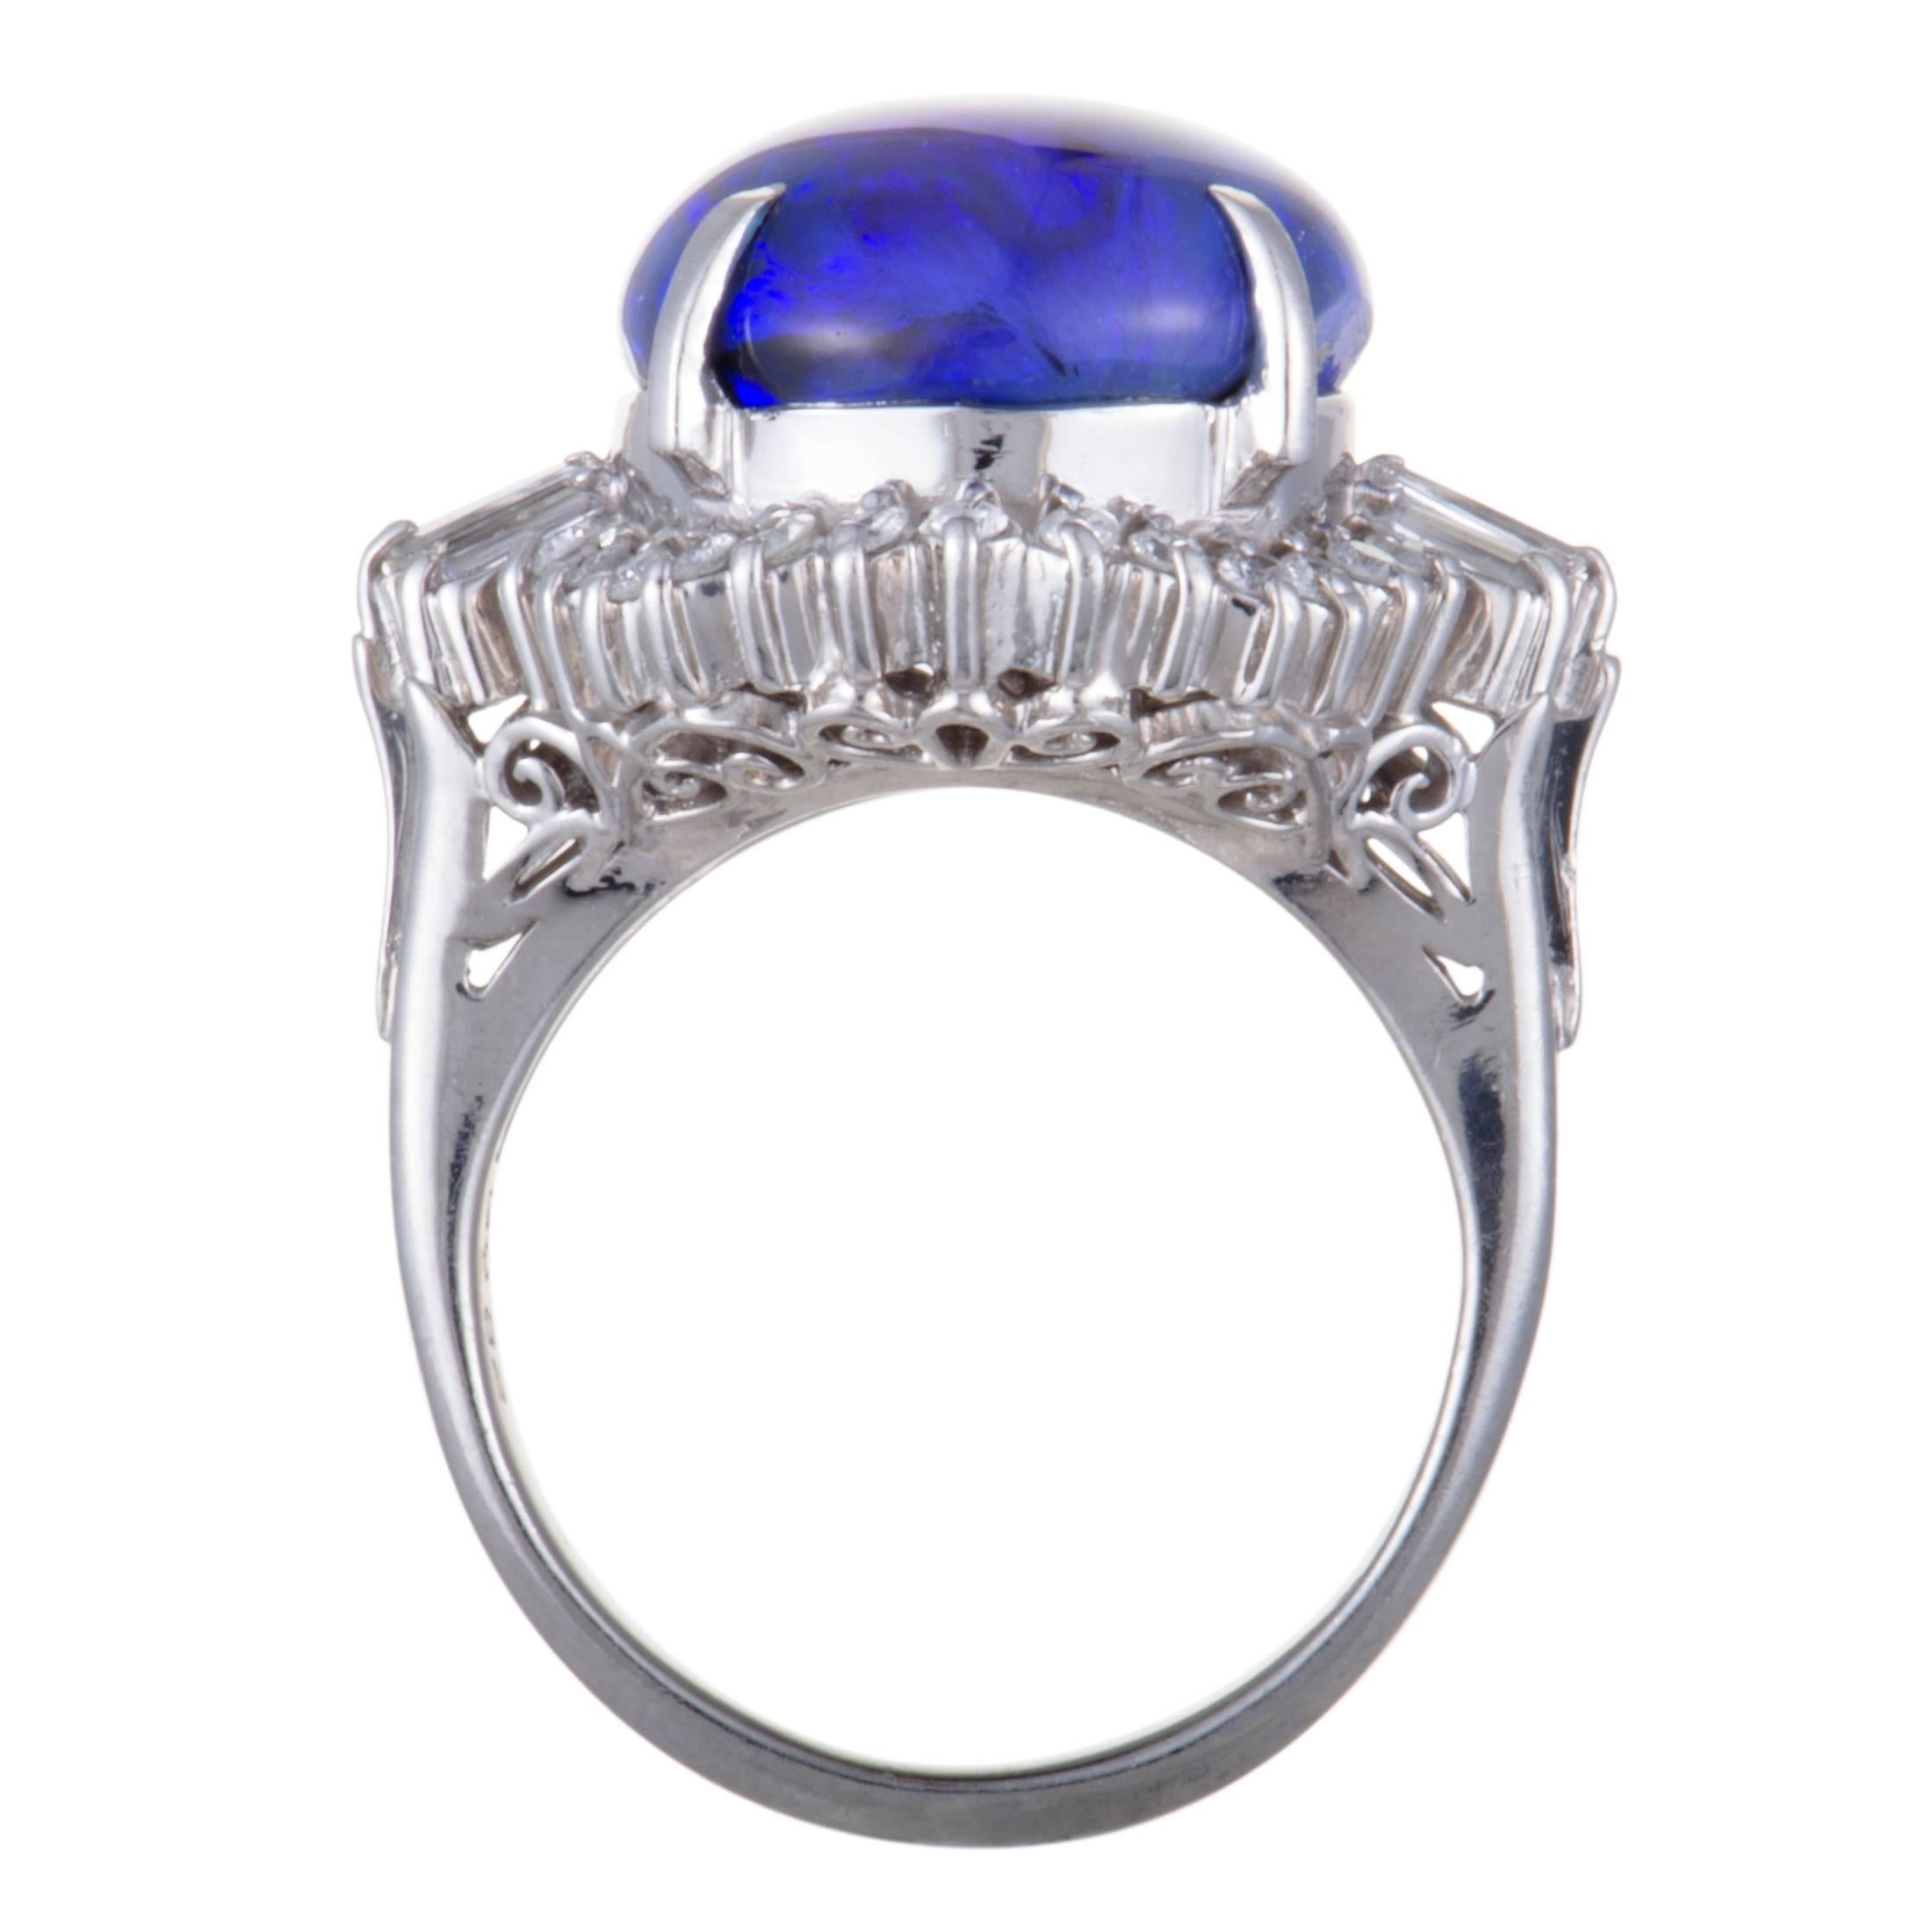 An attractive pop of color is given to this fashionable ring by the eye-catching blue opal that takes the central place, accompanied by a plethora of glamorously glistening diamonds. The ring is made of platinum and boasts a total of 0.82 carats of